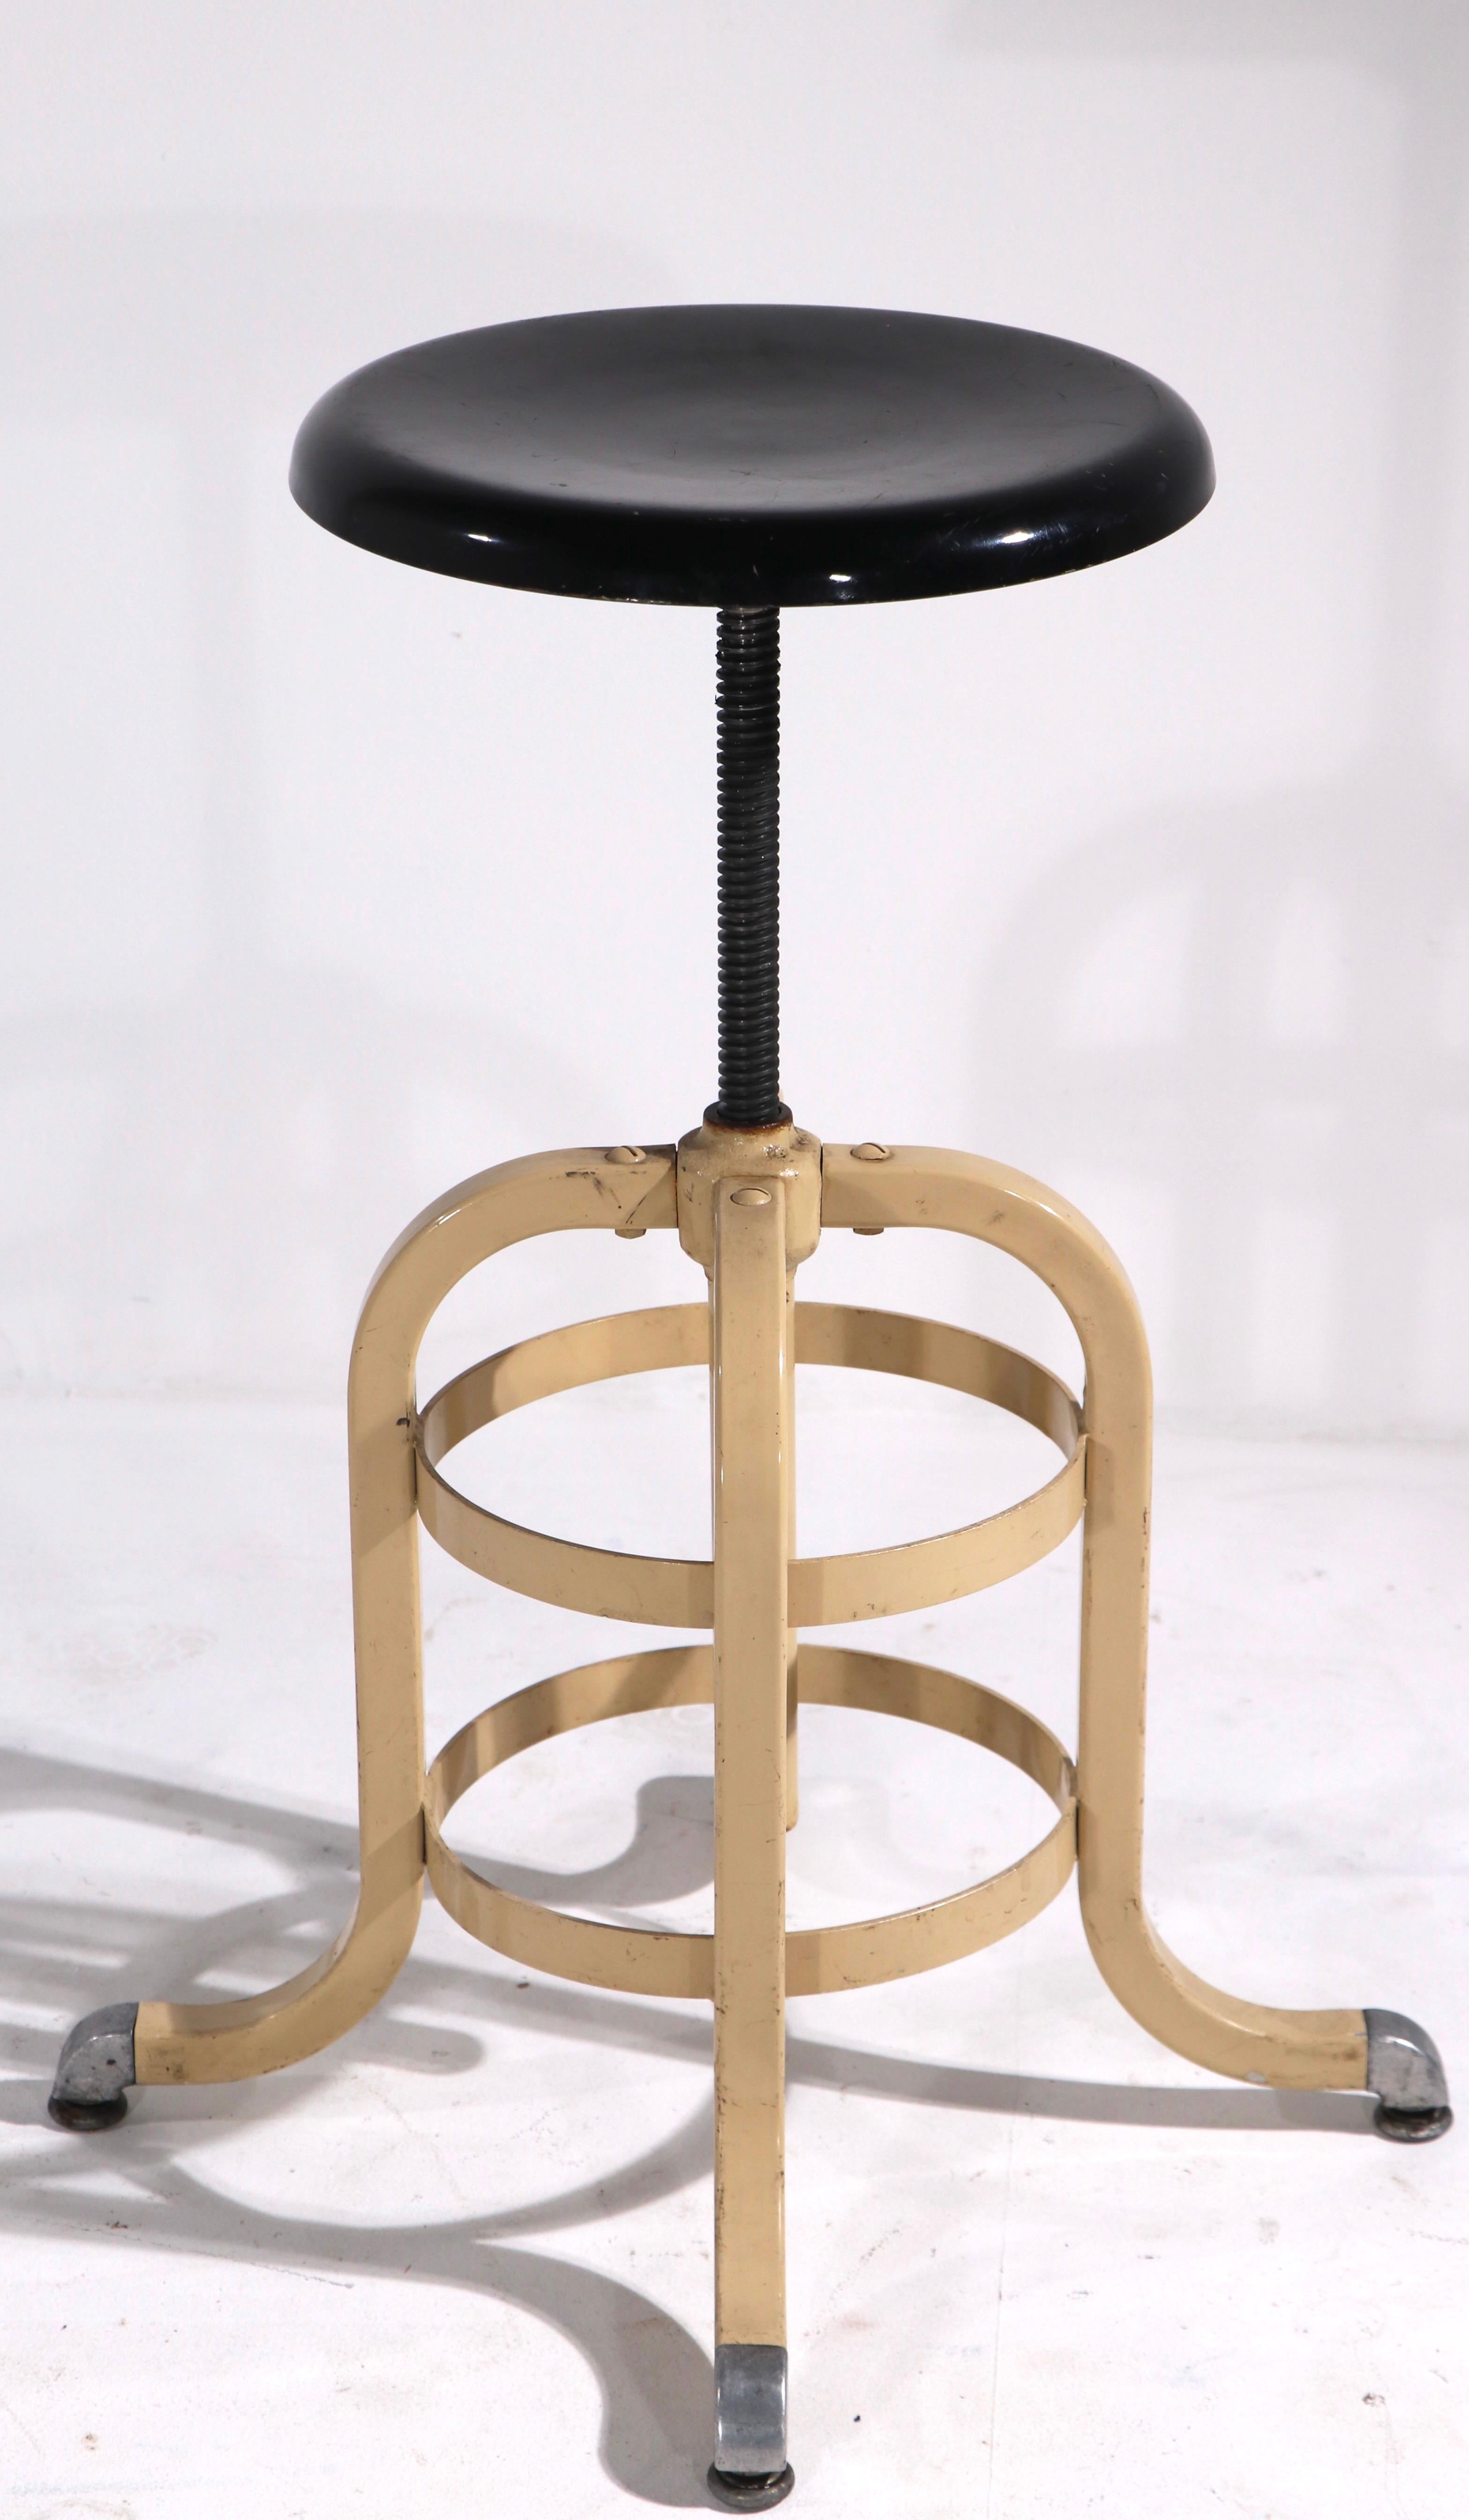 Nice industrial stool having a swivel top, with stationary base. Adjustable in height ( 26.5 - 18.5 ) Dia. of seat 12 inch. Exceptional original condition - Marked by maker A.S. Aloe.